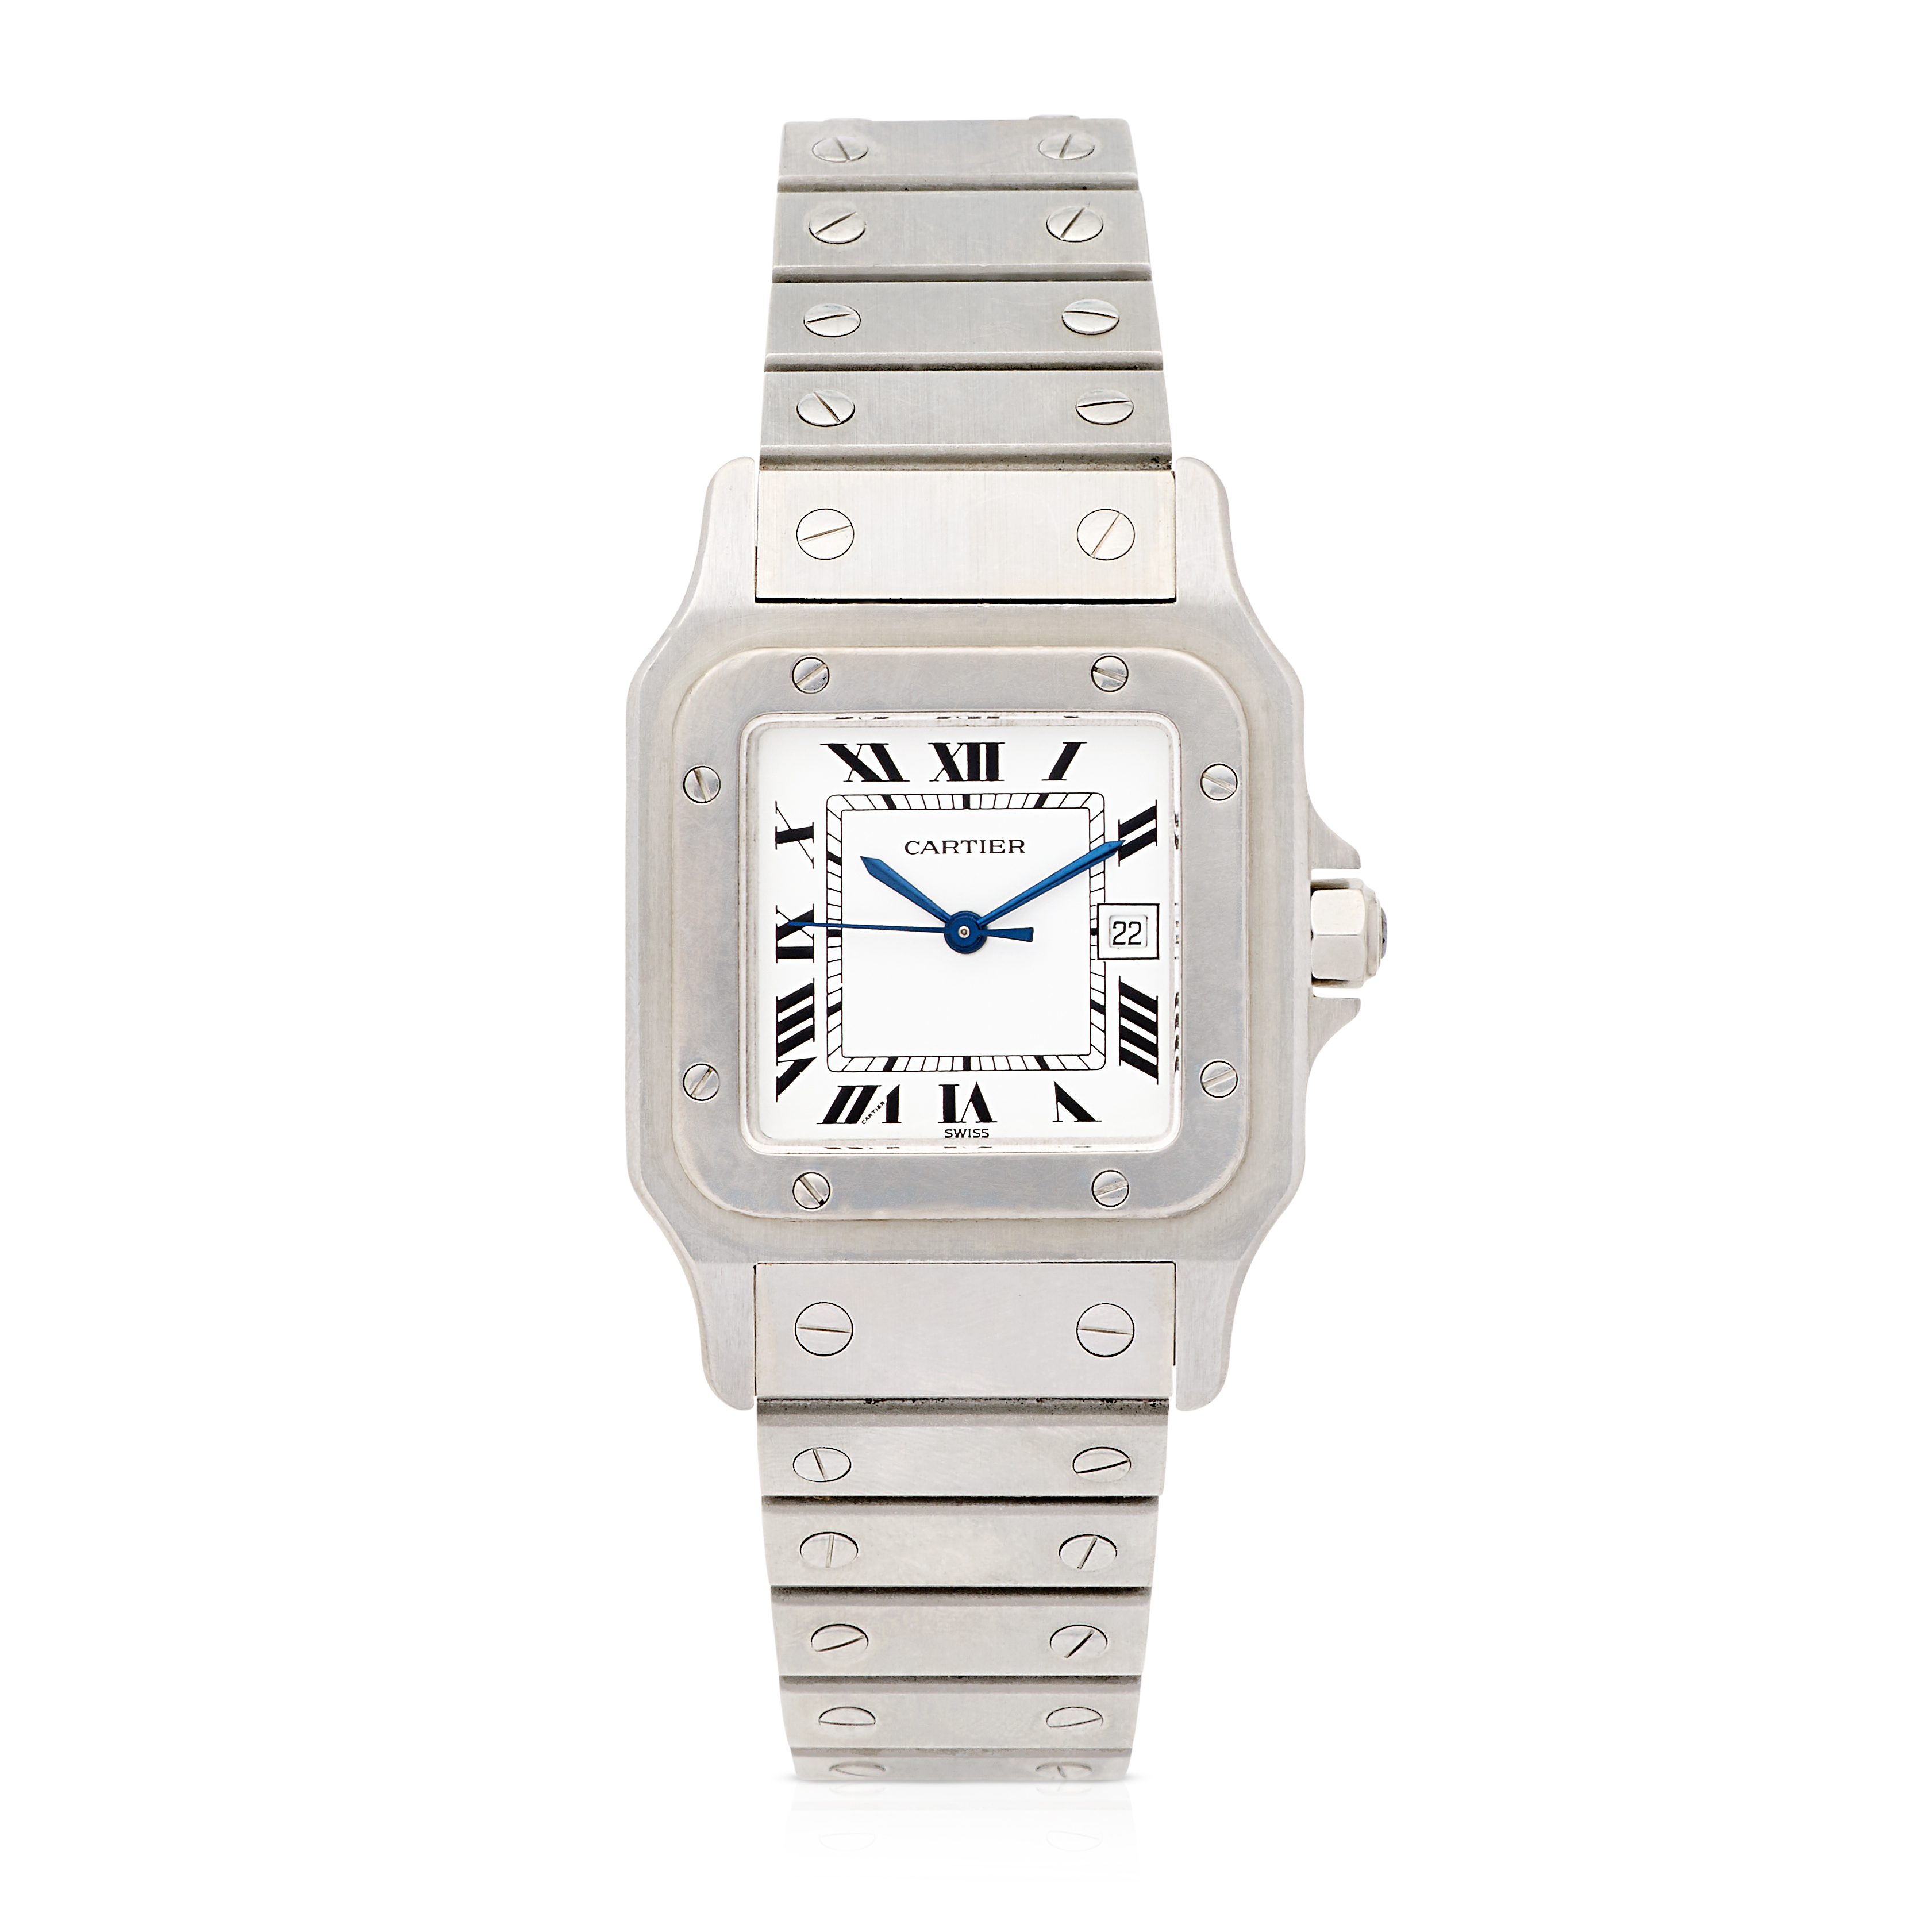 Cartier. A stainless steel automatic calendar bracelet watch Santos, Purchased 1st October 1978